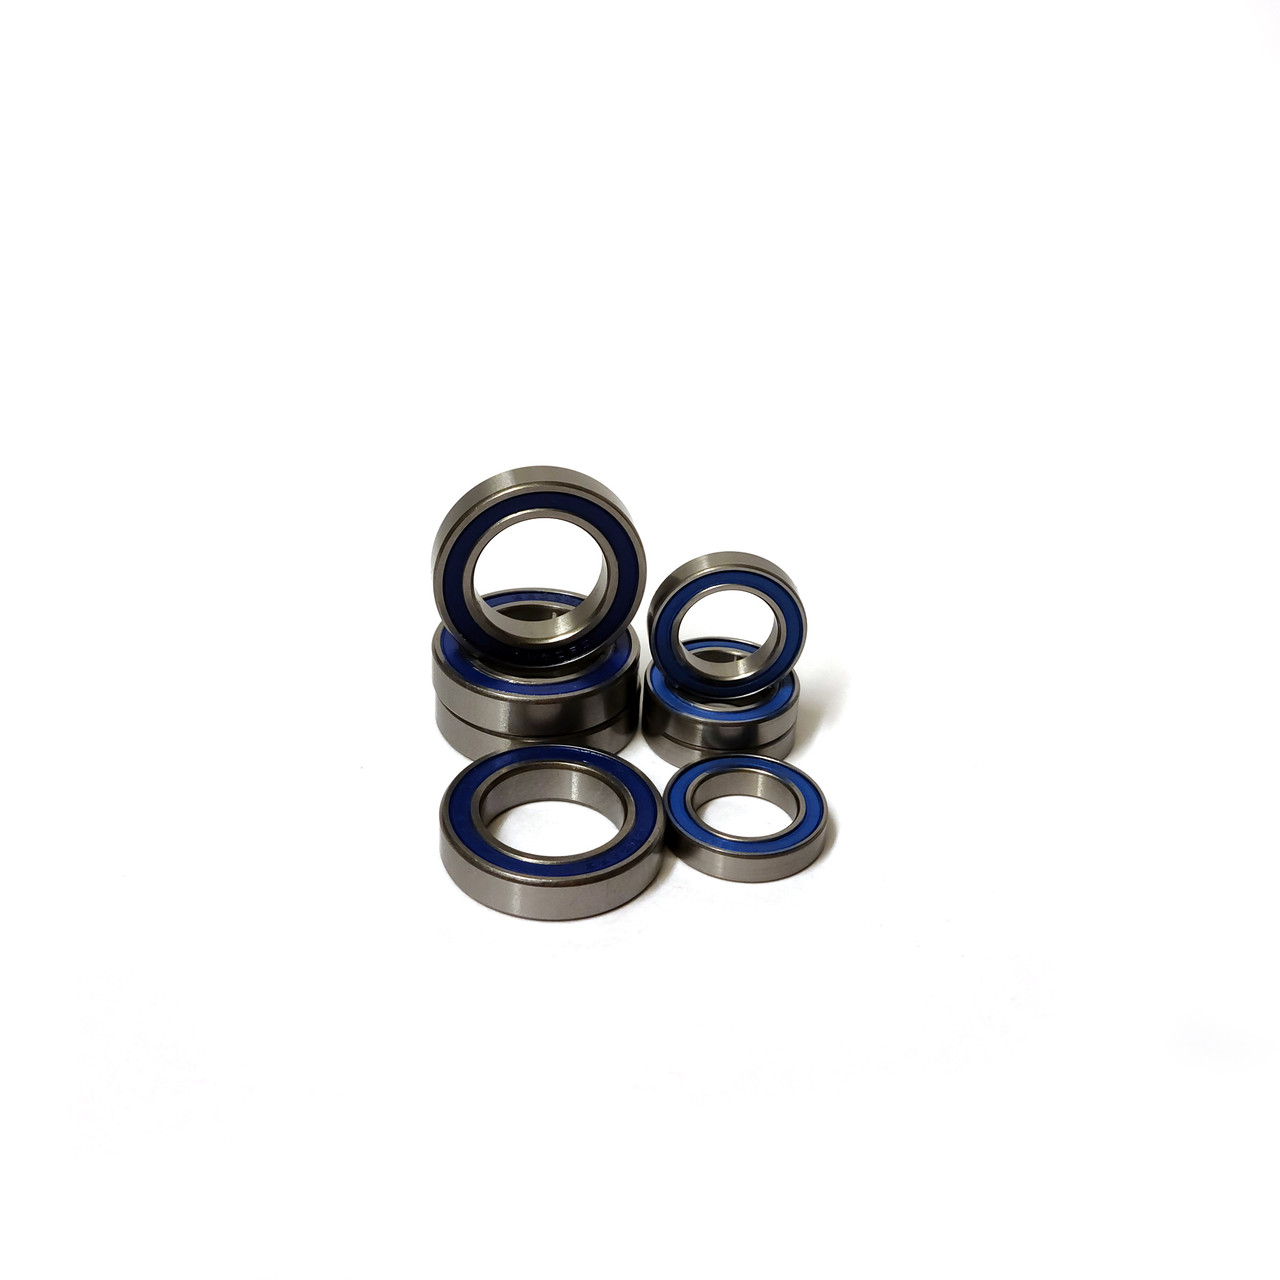 FOR Traxxas X-MAXX OVERSIZED Blue Rubber sealed wheel bearings.  8 pcs.
Includes 4-12x24x5 mm and 4-20x32x7 mm Bearings.